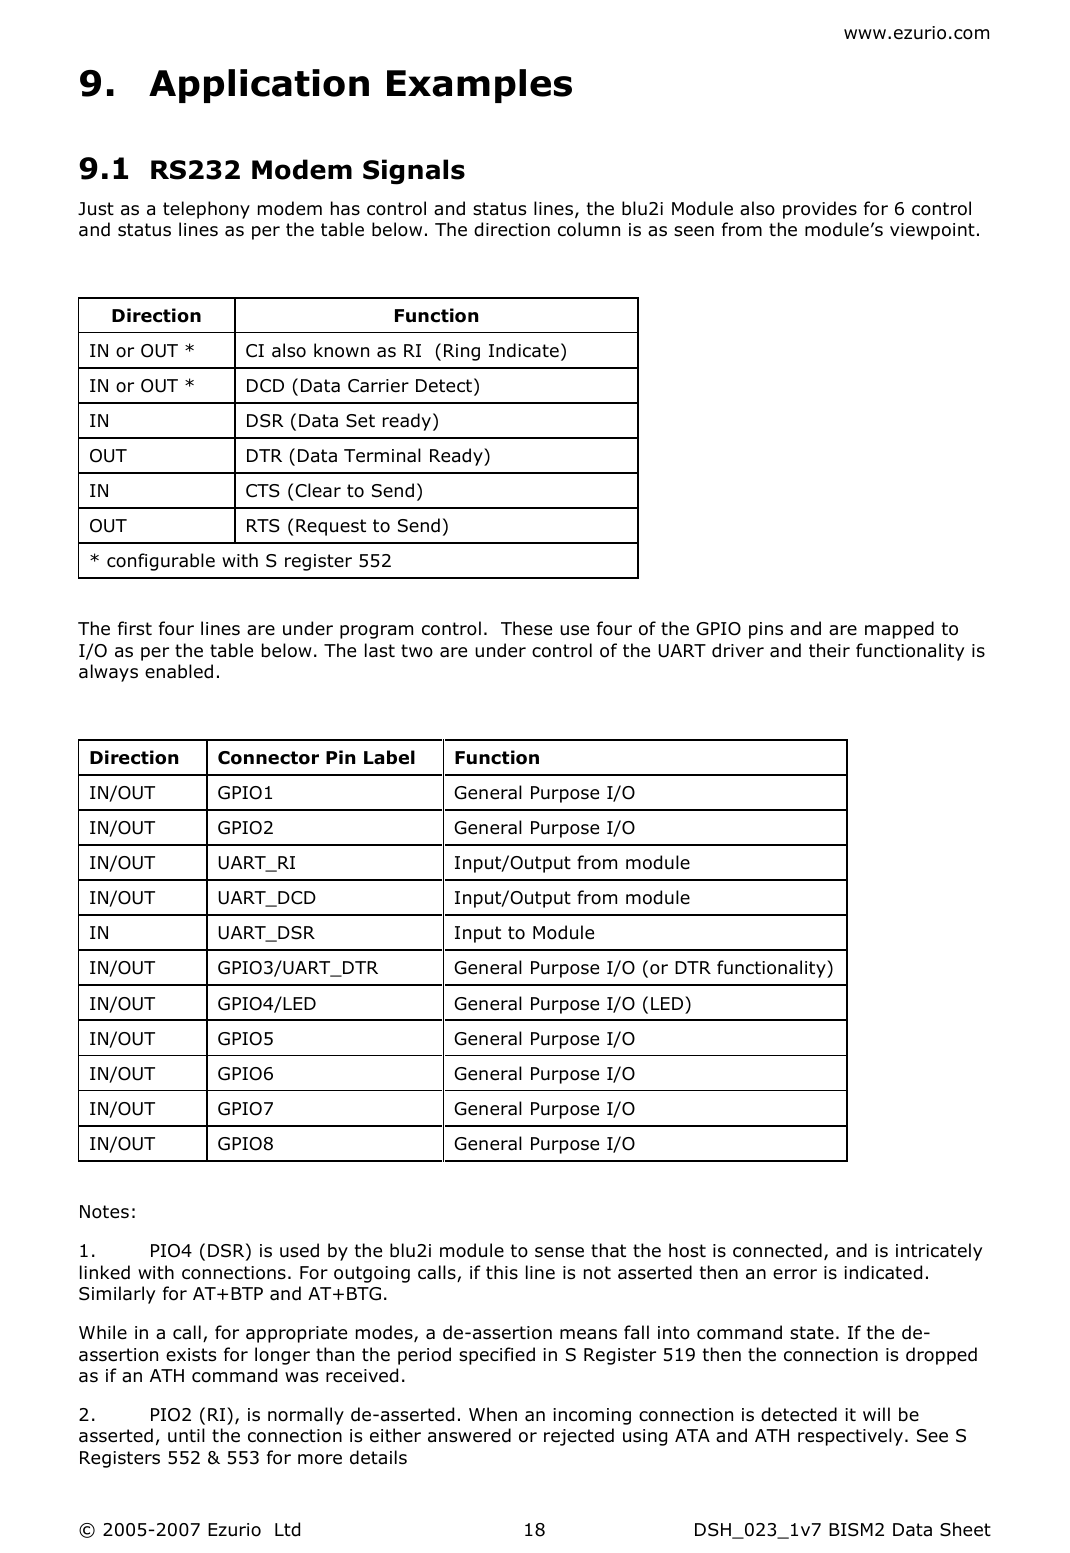 www.ezurio.com © 2005-2007 Ezurio  Ltd  DSH_023_1v7 BISM2 Data Sheet  189. Application Examples 9.1 RS232 Modem Signals Just as a telephony modem has control and status lines, the blu2i Module also provides for 6 control and status lines as per the table below. The direction column is as seen from the module’s viewpoint.  Direction  Function IN or OUT *  CI also known as RI  (Ring Indicate) IN or OUT *  DCD (Data Carrier Detect) IN  DSR (Data Set ready) OUT  DTR (Data Terminal Ready) IN  CTS (Clear to Send) OUT  RTS (Request to Send) * configurable with S register 552  The first four lines are under program control.  These use four of the GPIO pins and are mapped to I/O as per the table below. The last two are under control of the UART driver and their functionality is always enabled.  Direction  Connector Pin Label  Function IN/OUT  GPIO1  General Purpose I/O IN/OUT  GPIO2  General Purpose I/O IN/OUT  UART_RI  Input/Output from module IN/OUT  UART_DCD  Input/Output from module IN  UART_DSR  Input to Module IN/OUT  GPIO3/UART_DTR  General Purpose I/O (or DTR functionality) IN/OUT  GPIO4/LED  General Purpose I/O (LED)  IN/OUT  GPIO5  General Purpose I/O  IN/OUT  GPIO6  General Purpose I/O  IN/OUT  GPIO7  General Purpose I/O  IN/OUT  GPIO8  General Purpose I/O   Notes: 1.  PIO4 (DSR) is used by the blu2i module to sense that the host is connected, and is intricately linked with connections. For outgoing calls, if this line is not asserted then an error is indicated. Similarly for AT+BTP and AT+BTG. While in a call, for appropriate modes, a de-assertion means fall into command state. If the de-assertion exists for longer than the period specified in S Register 519 then the connection is dropped as if an ATH command was received. 2.  PIO2 (RI), is normally de-asserted. When an incoming connection is detected it will be asserted, until the connection is either answered or rejected using ATA and ATH respectively. See S Registers 552 &amp; 553 for more details 